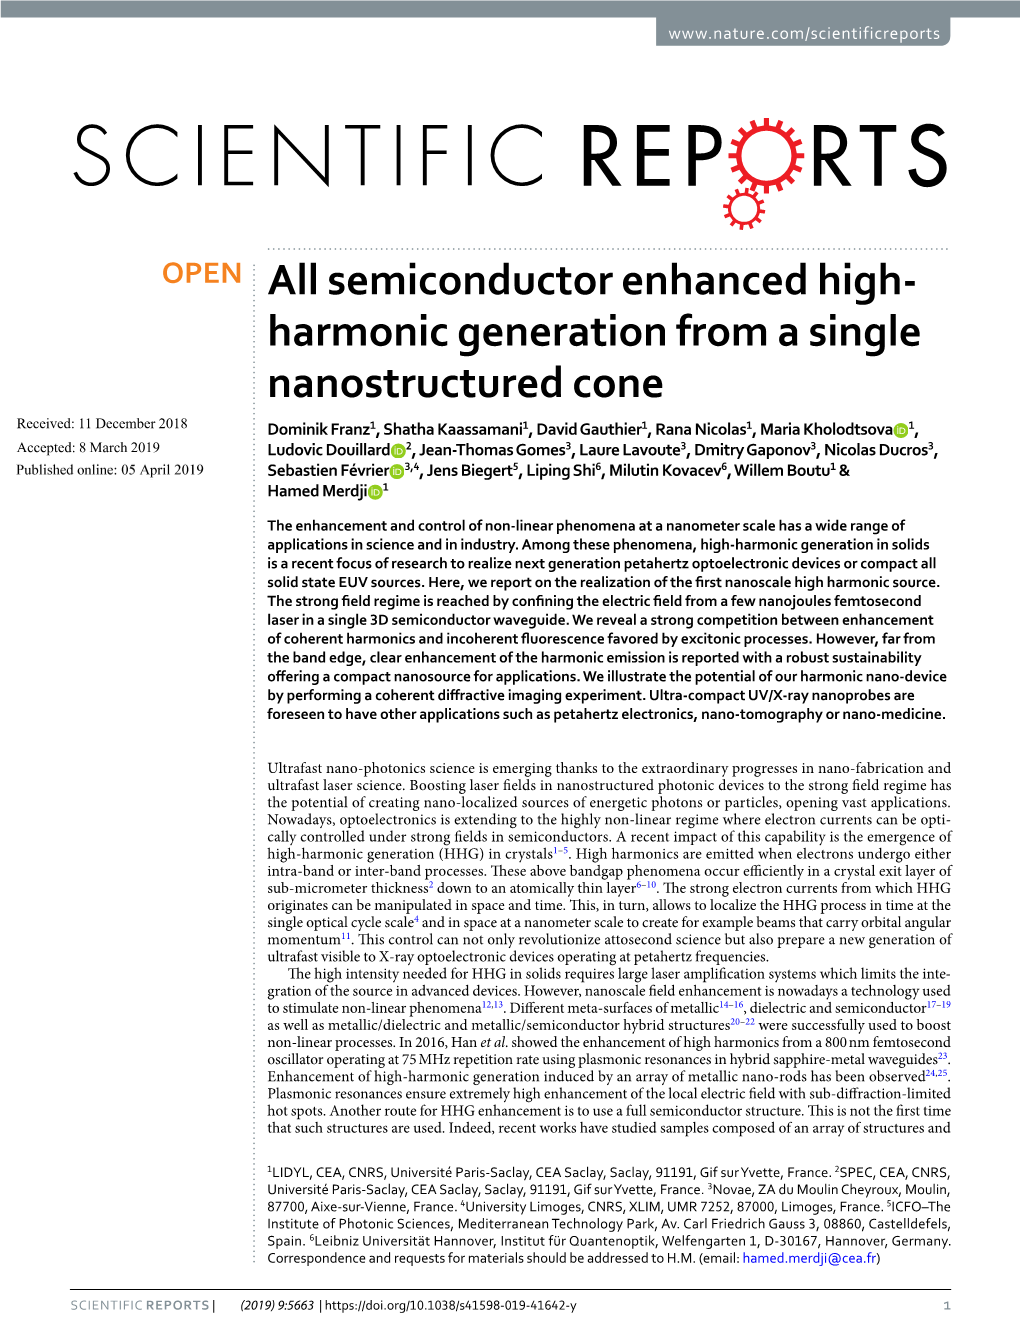 All Semiconductor Enhanced High-Harmonic Generation from a Single Nanostructured Cone